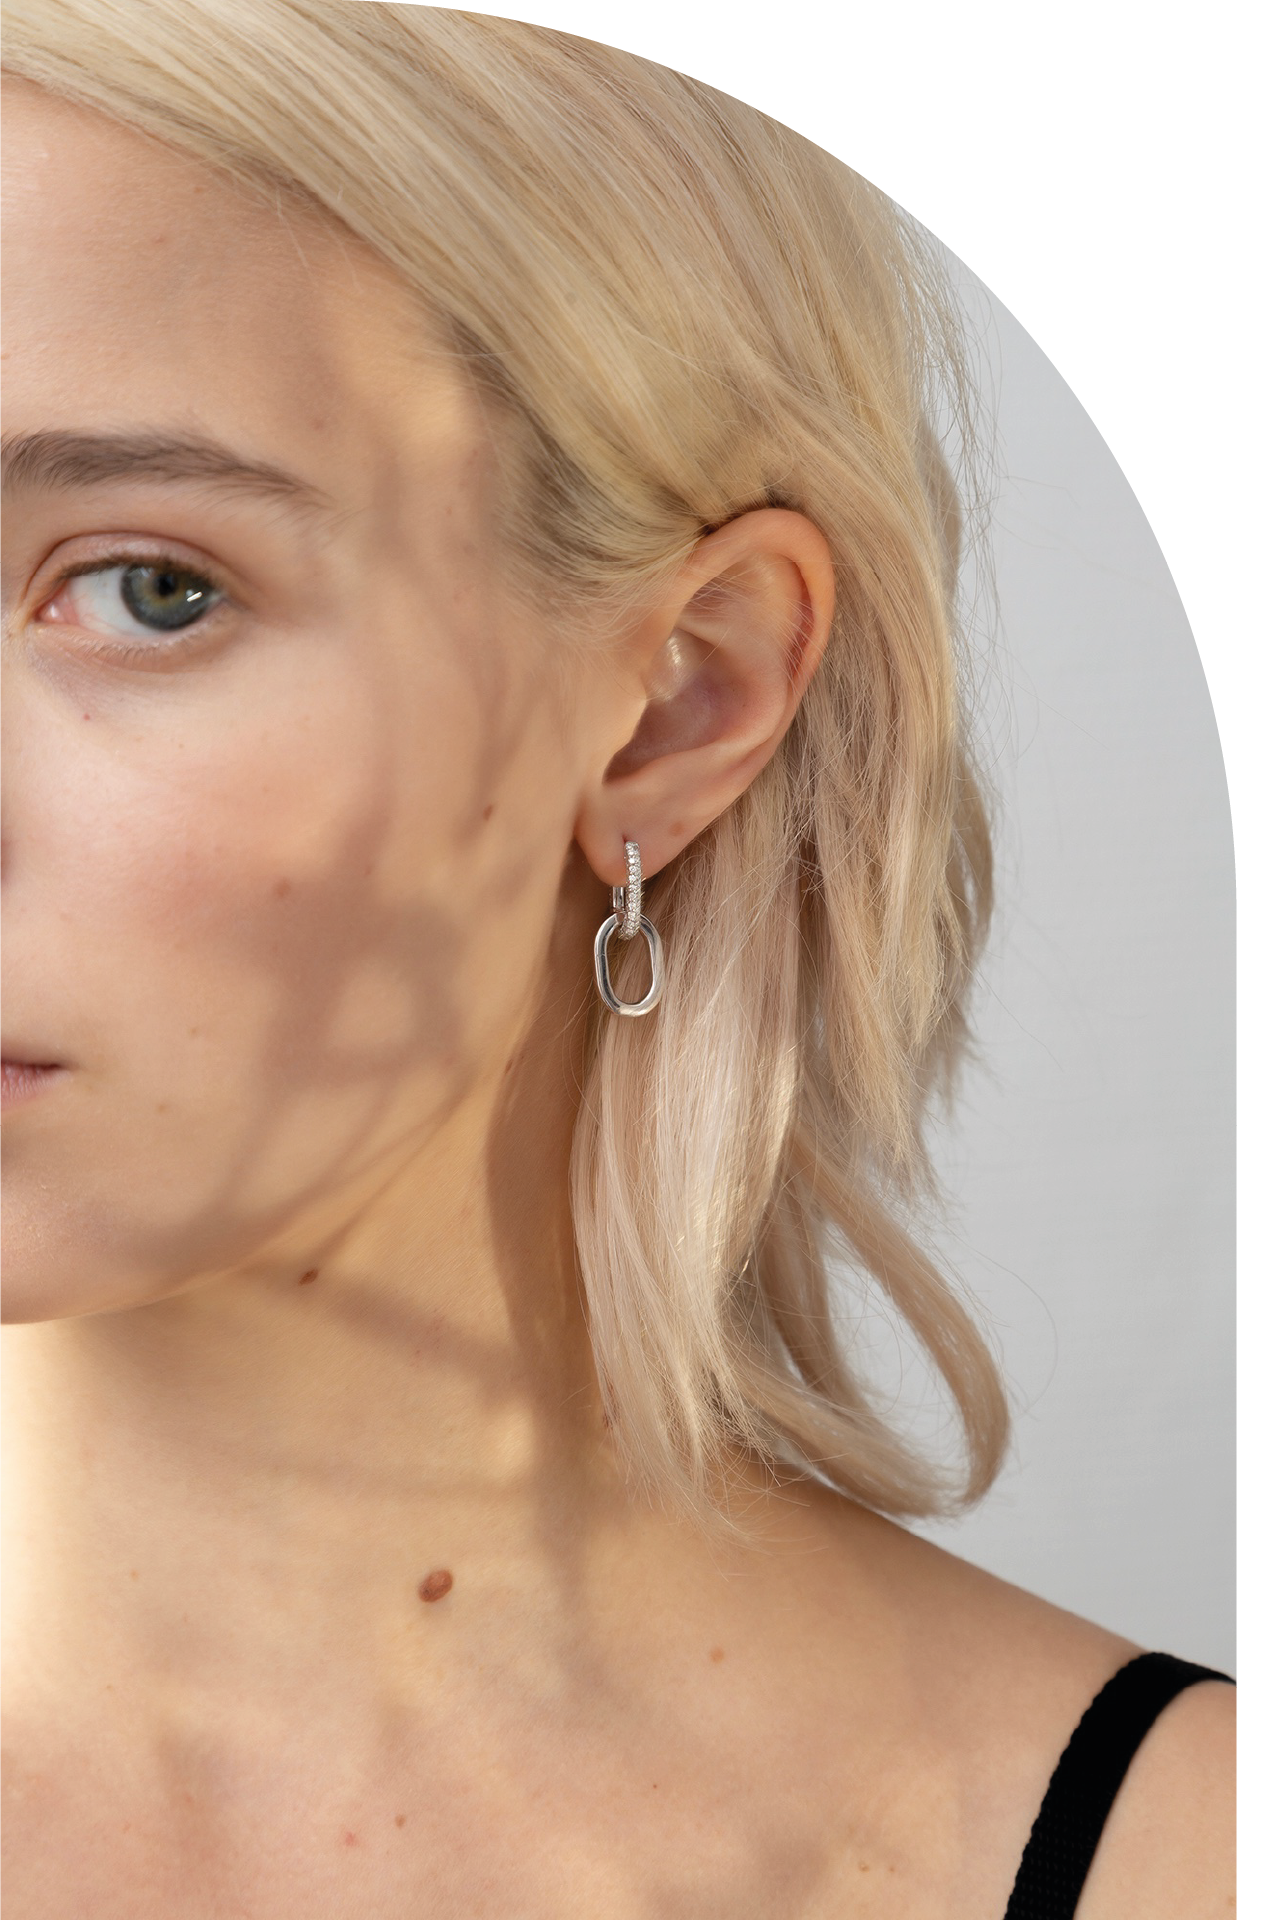 Recycled gold - In order to completely avoid mines in all aspects of our supply chain, as well as to minimize new production and consumption, all our gold comes from heirloom jewelry melted down into gold beads of the highest purity and quality. Pictured here is the Dalliance Ecluse Earring.